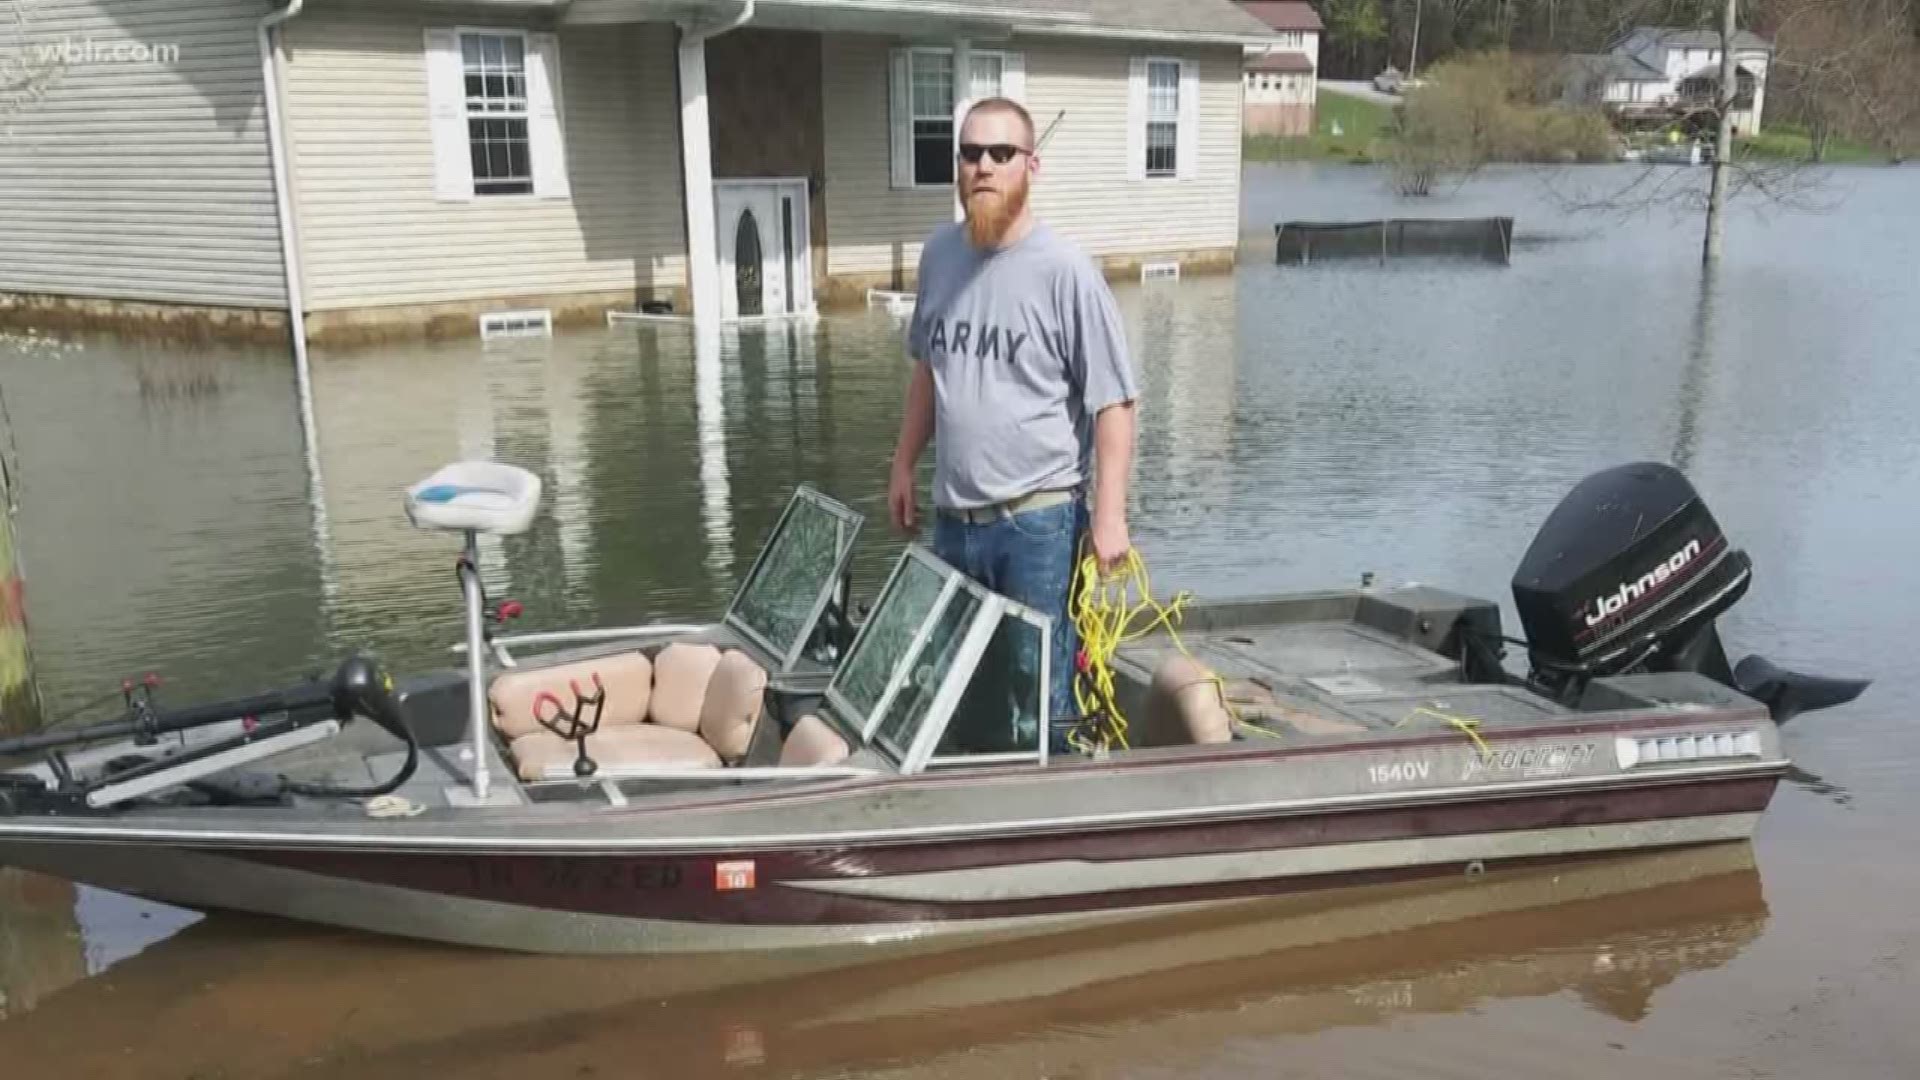 It's been almost a full month since rain drenched parts of East Tennessee -- and homes are still under water.